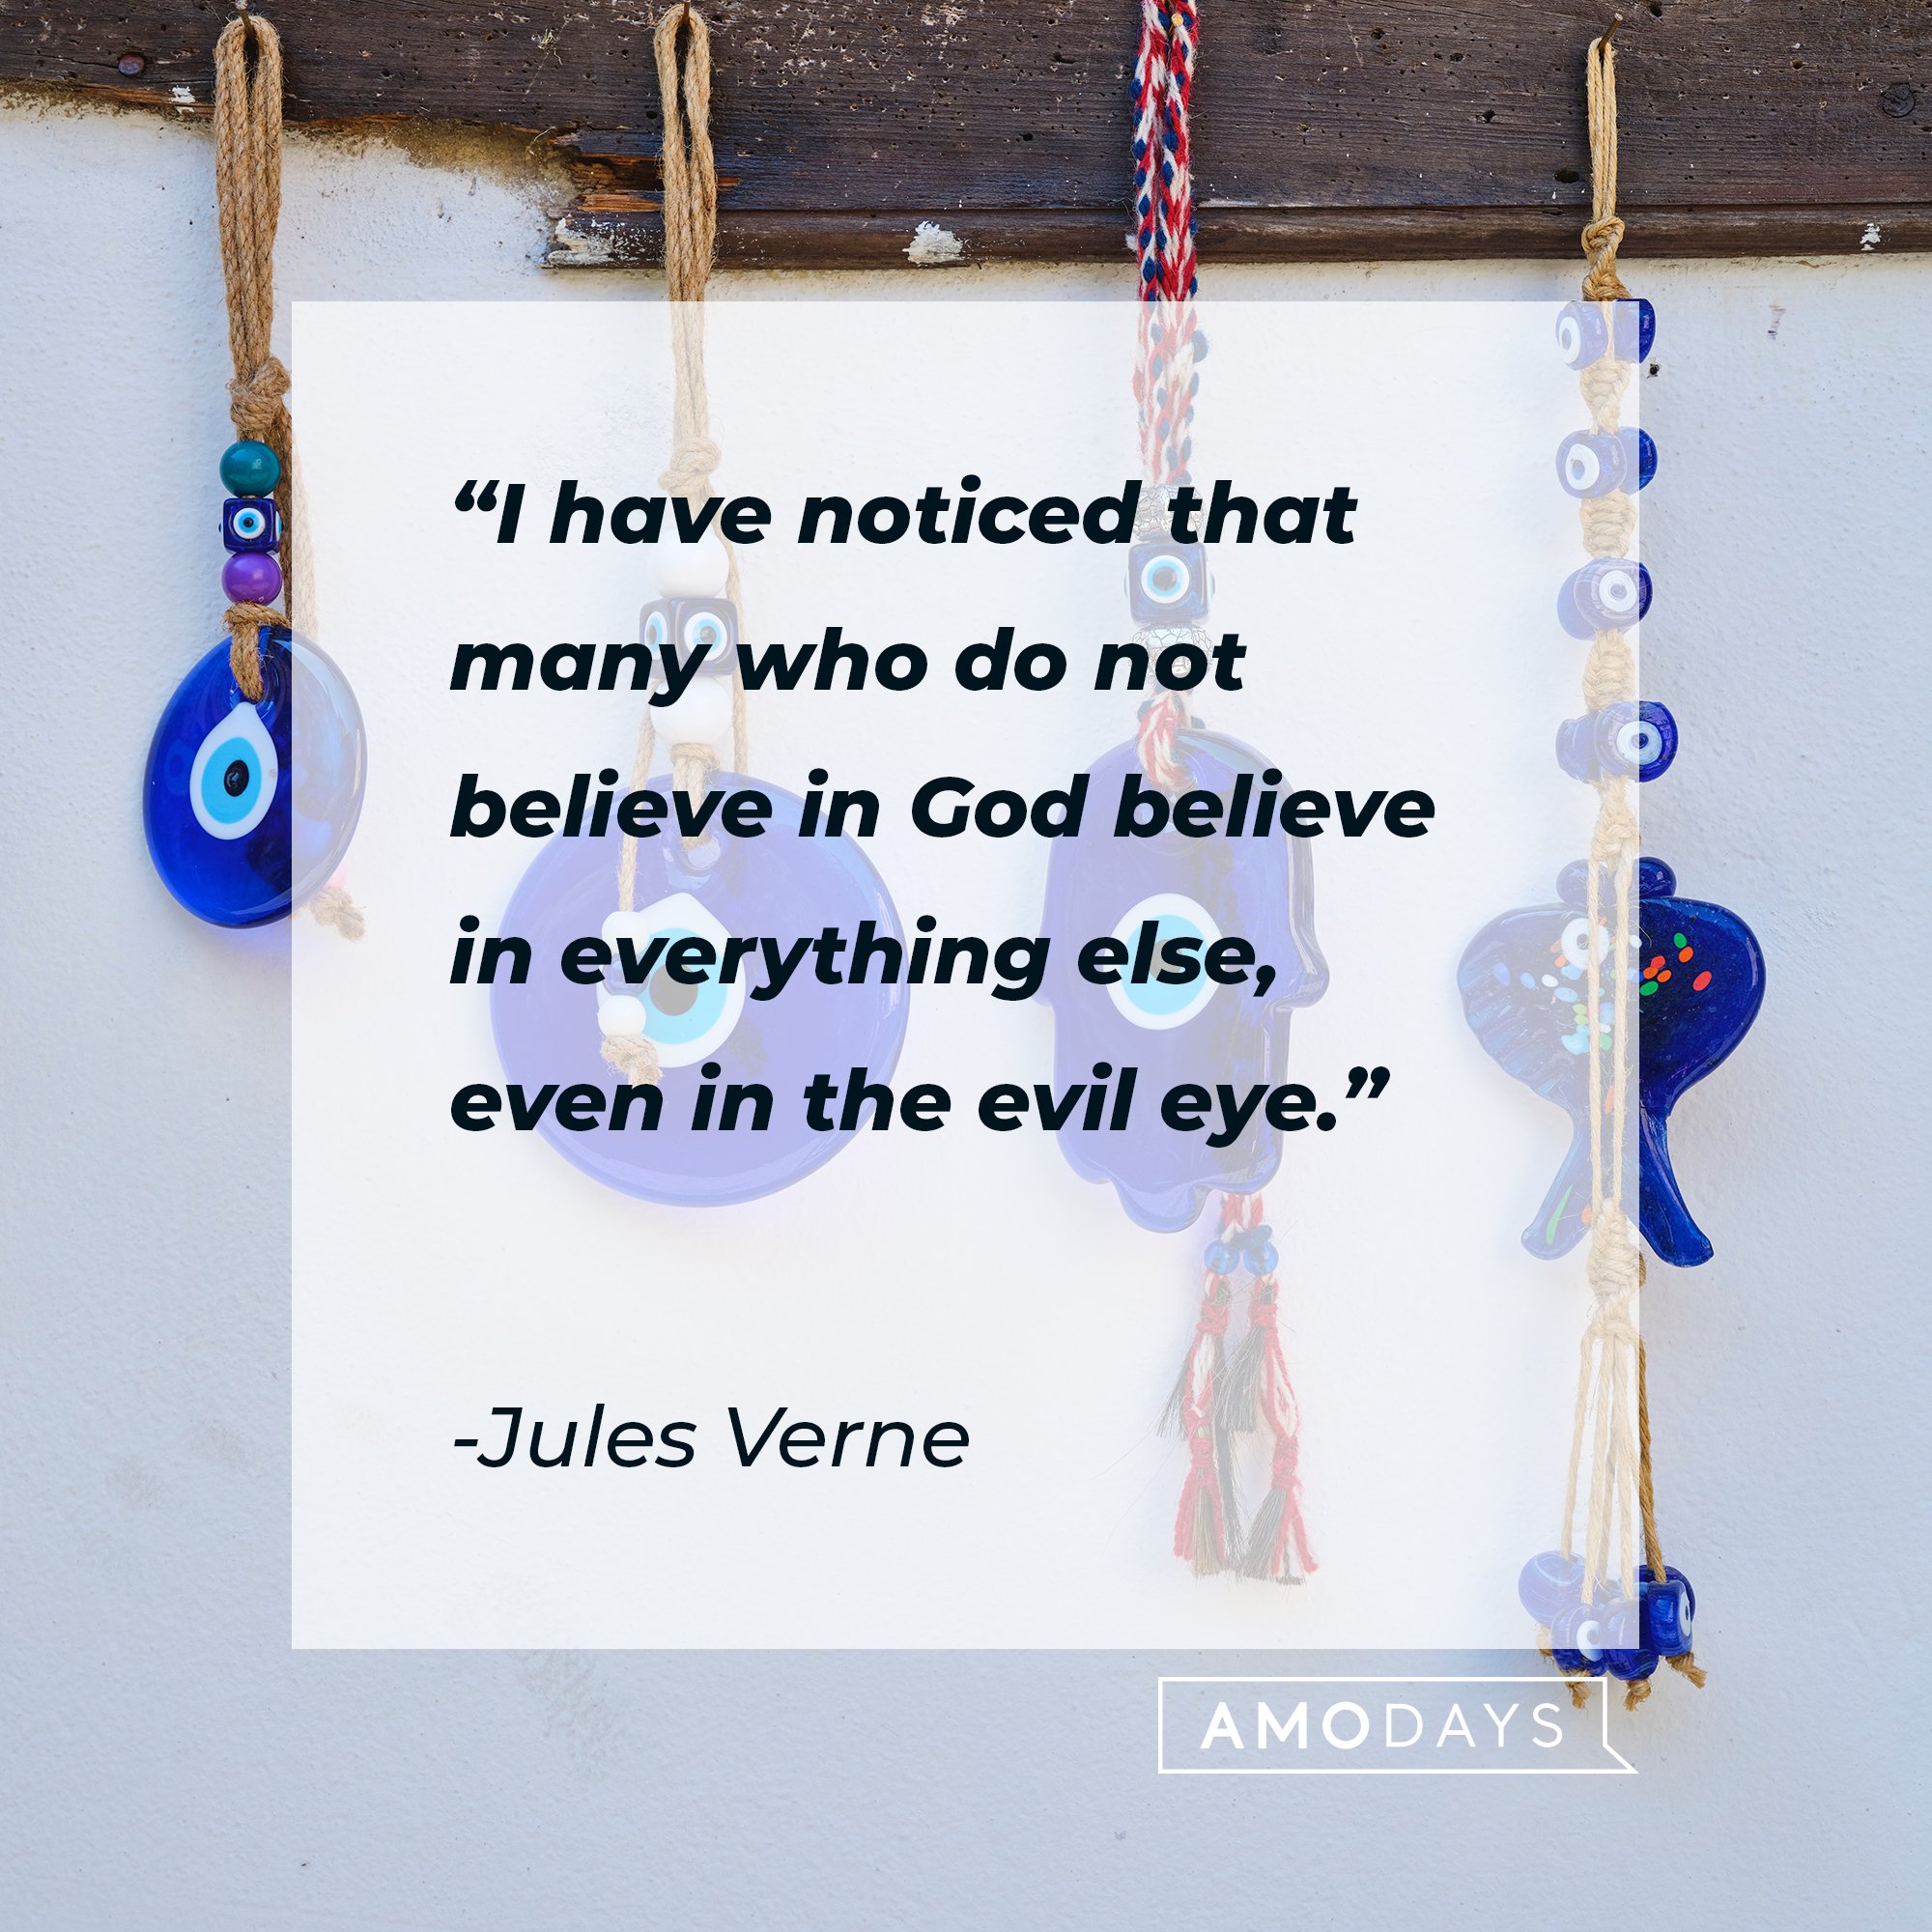 Jules Verne’s quote: "I have noticed that many who do not believe in God believe in everything else, even in the evil eye." | Image: AmoDays